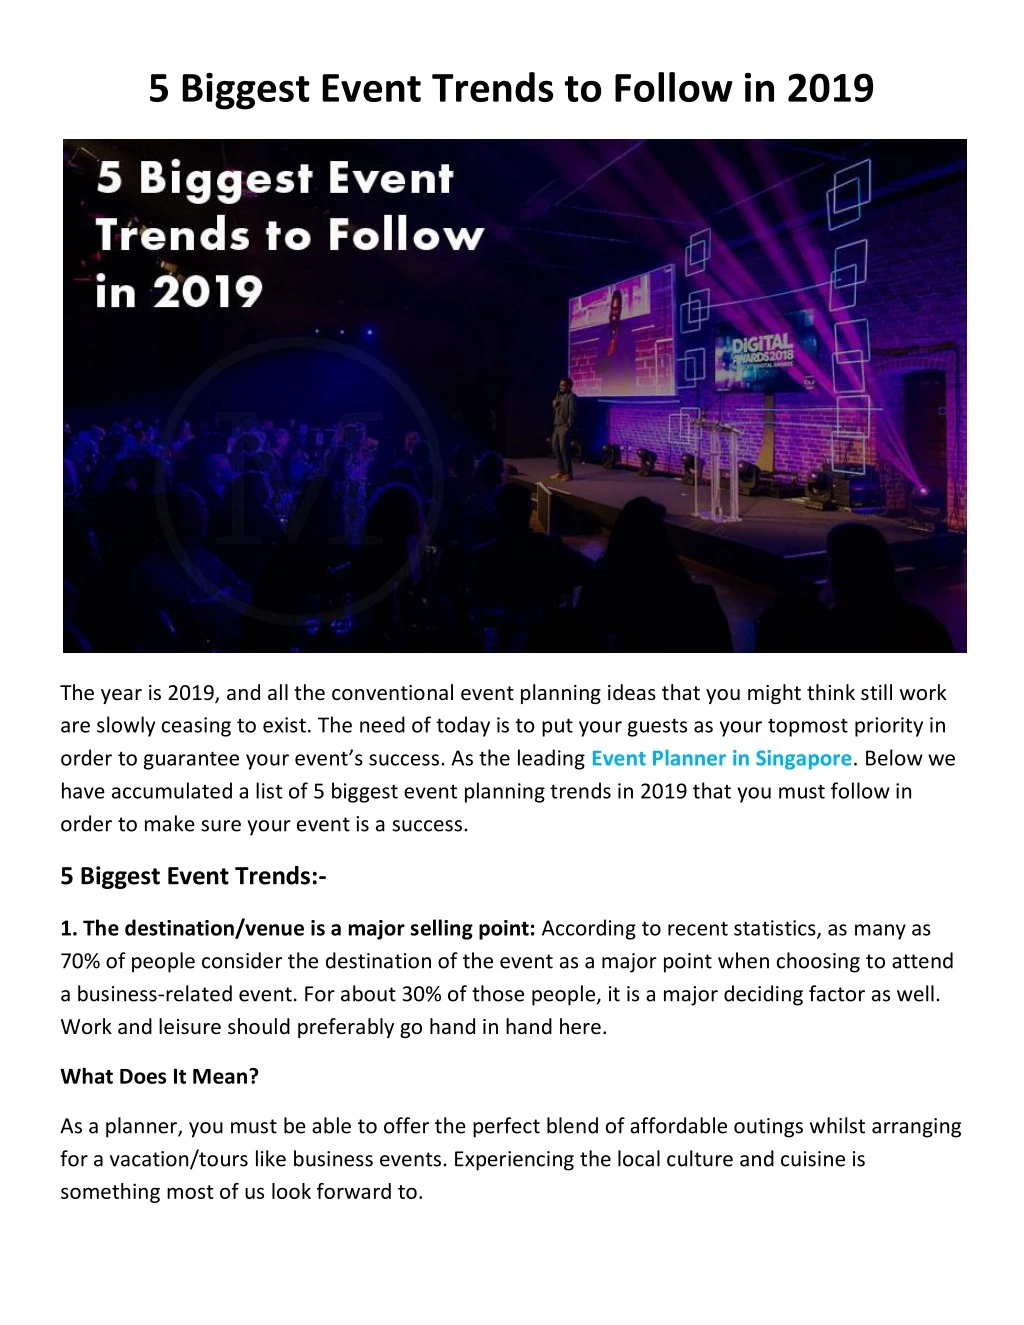 5 biggest event trends to follow in 2019